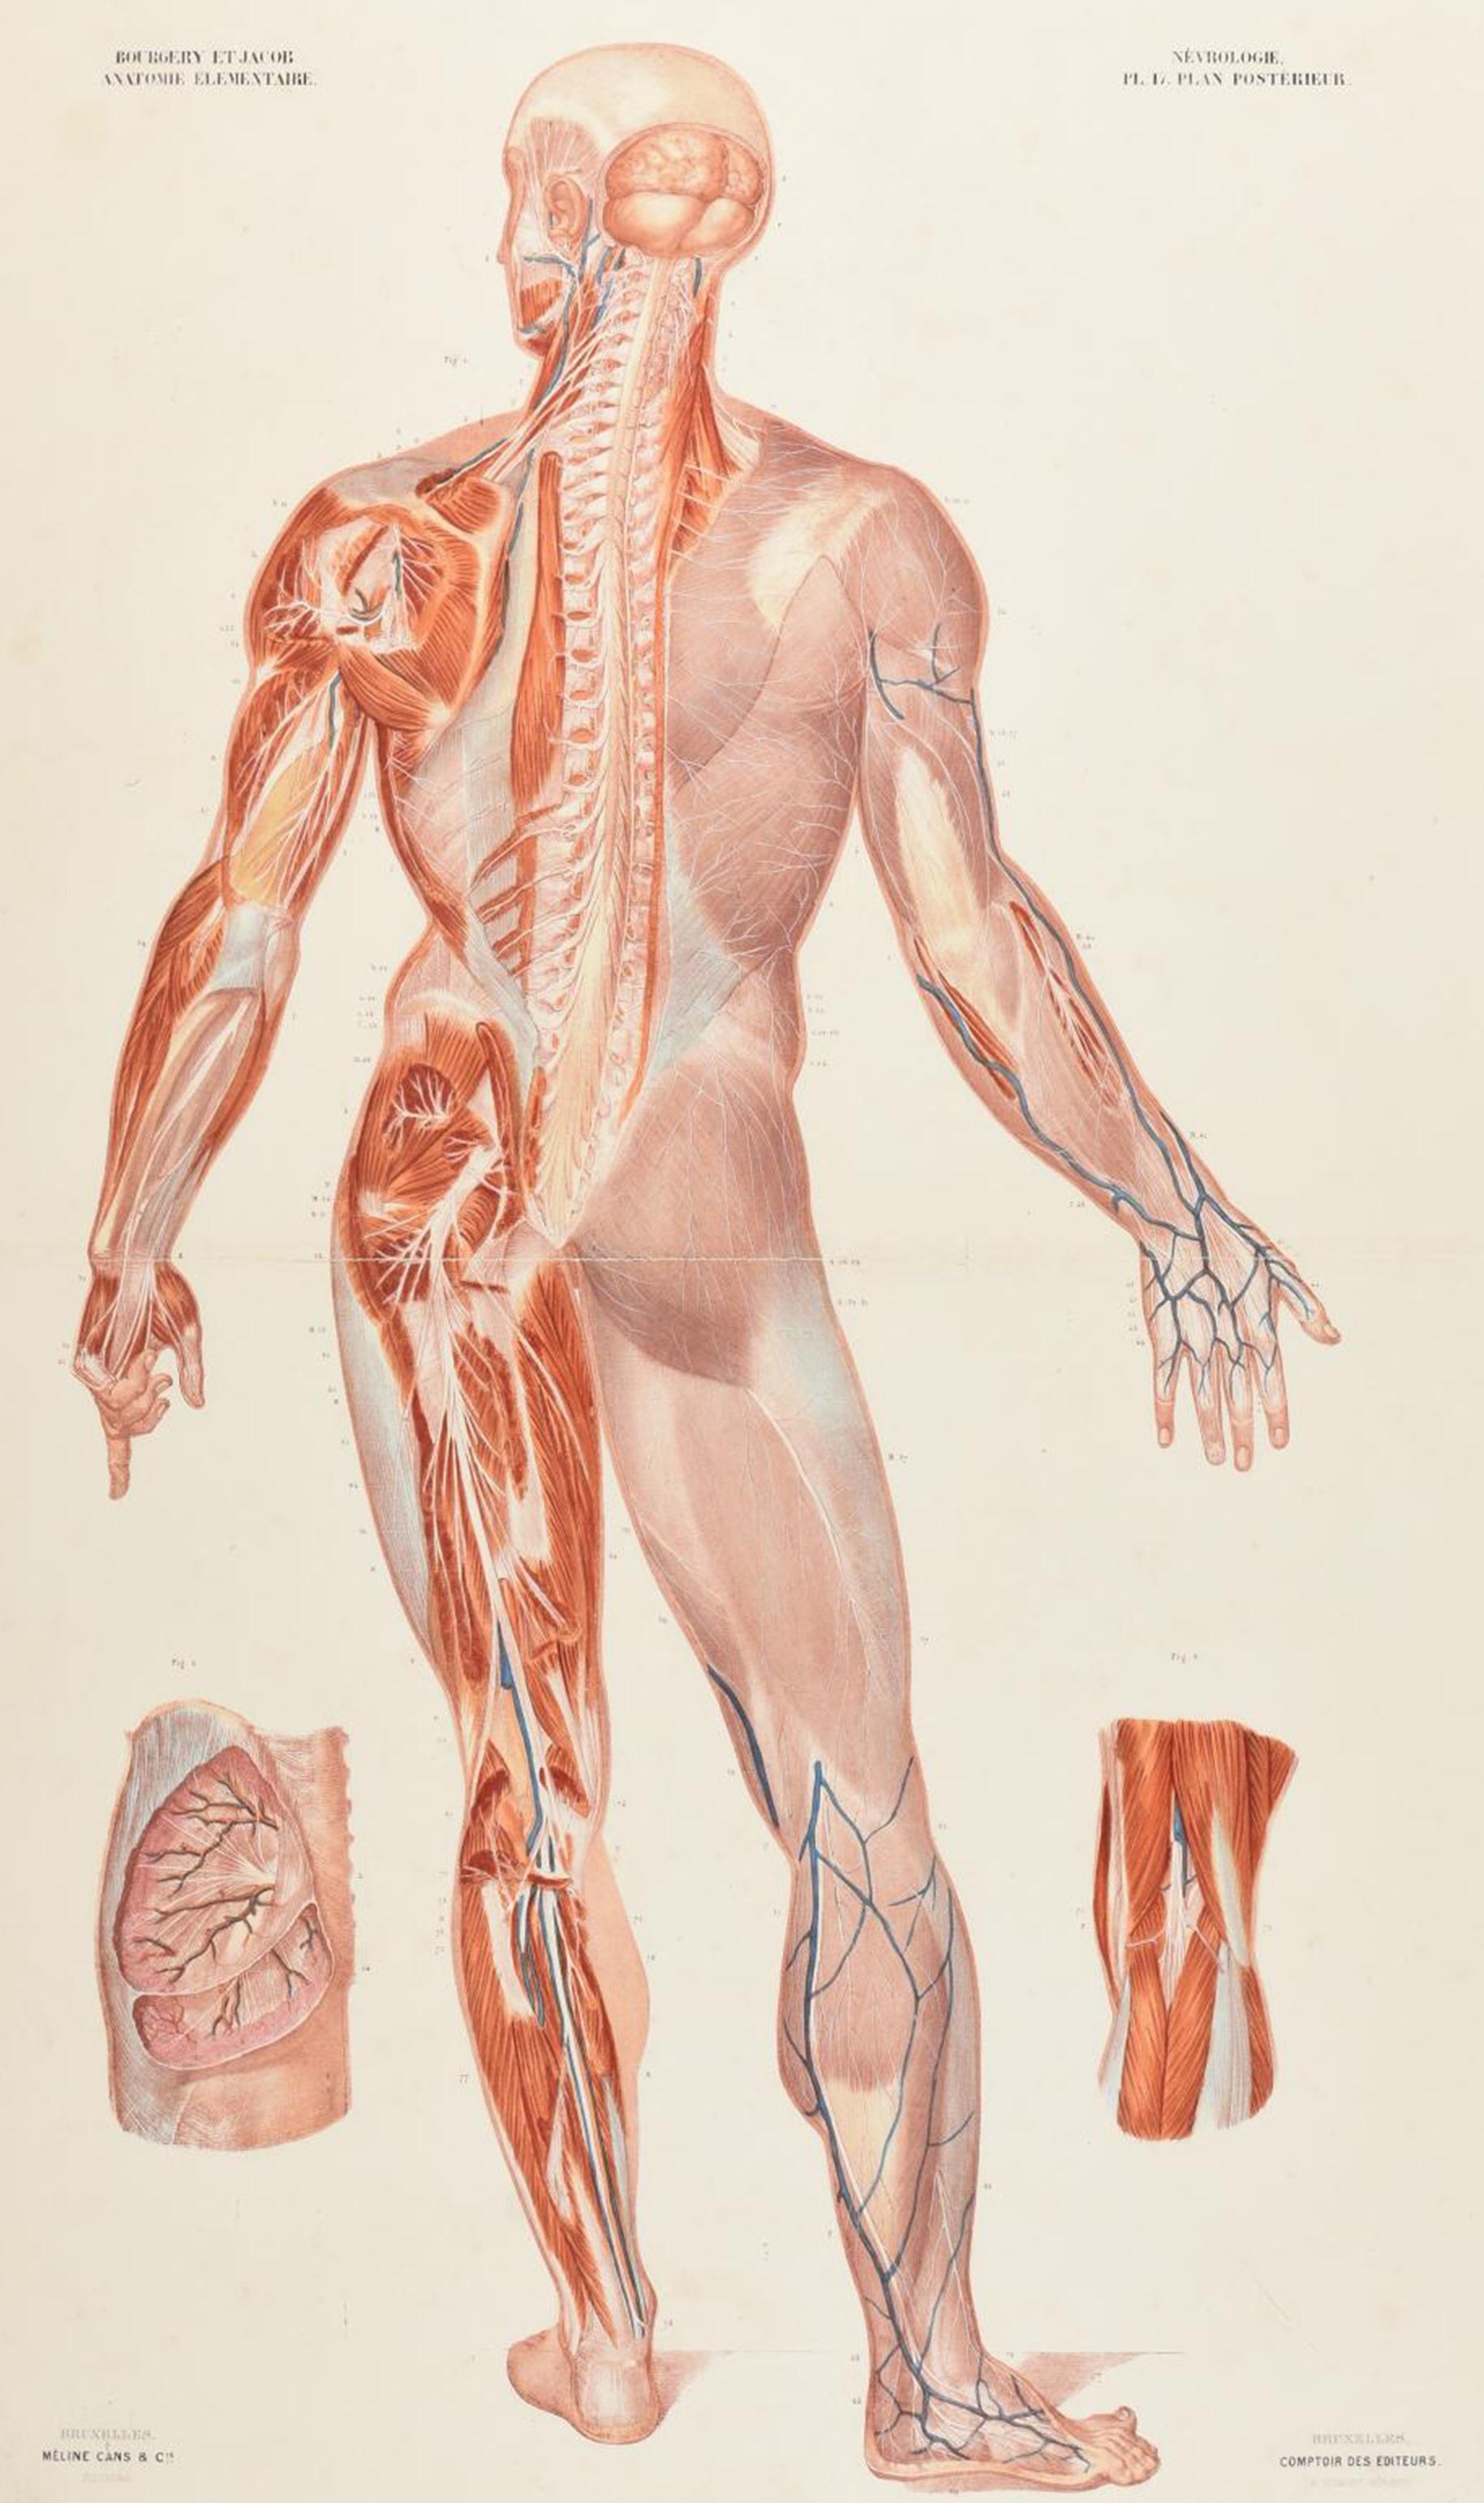 Coloured anatomical plate (no. 17), showing the nervous system in the human body. From Jean-Baptiste Bourgery's 'Anatomie élementaire', published 1843, illustrated by Nicolas-Henri Jacobs. With text captions in corners.